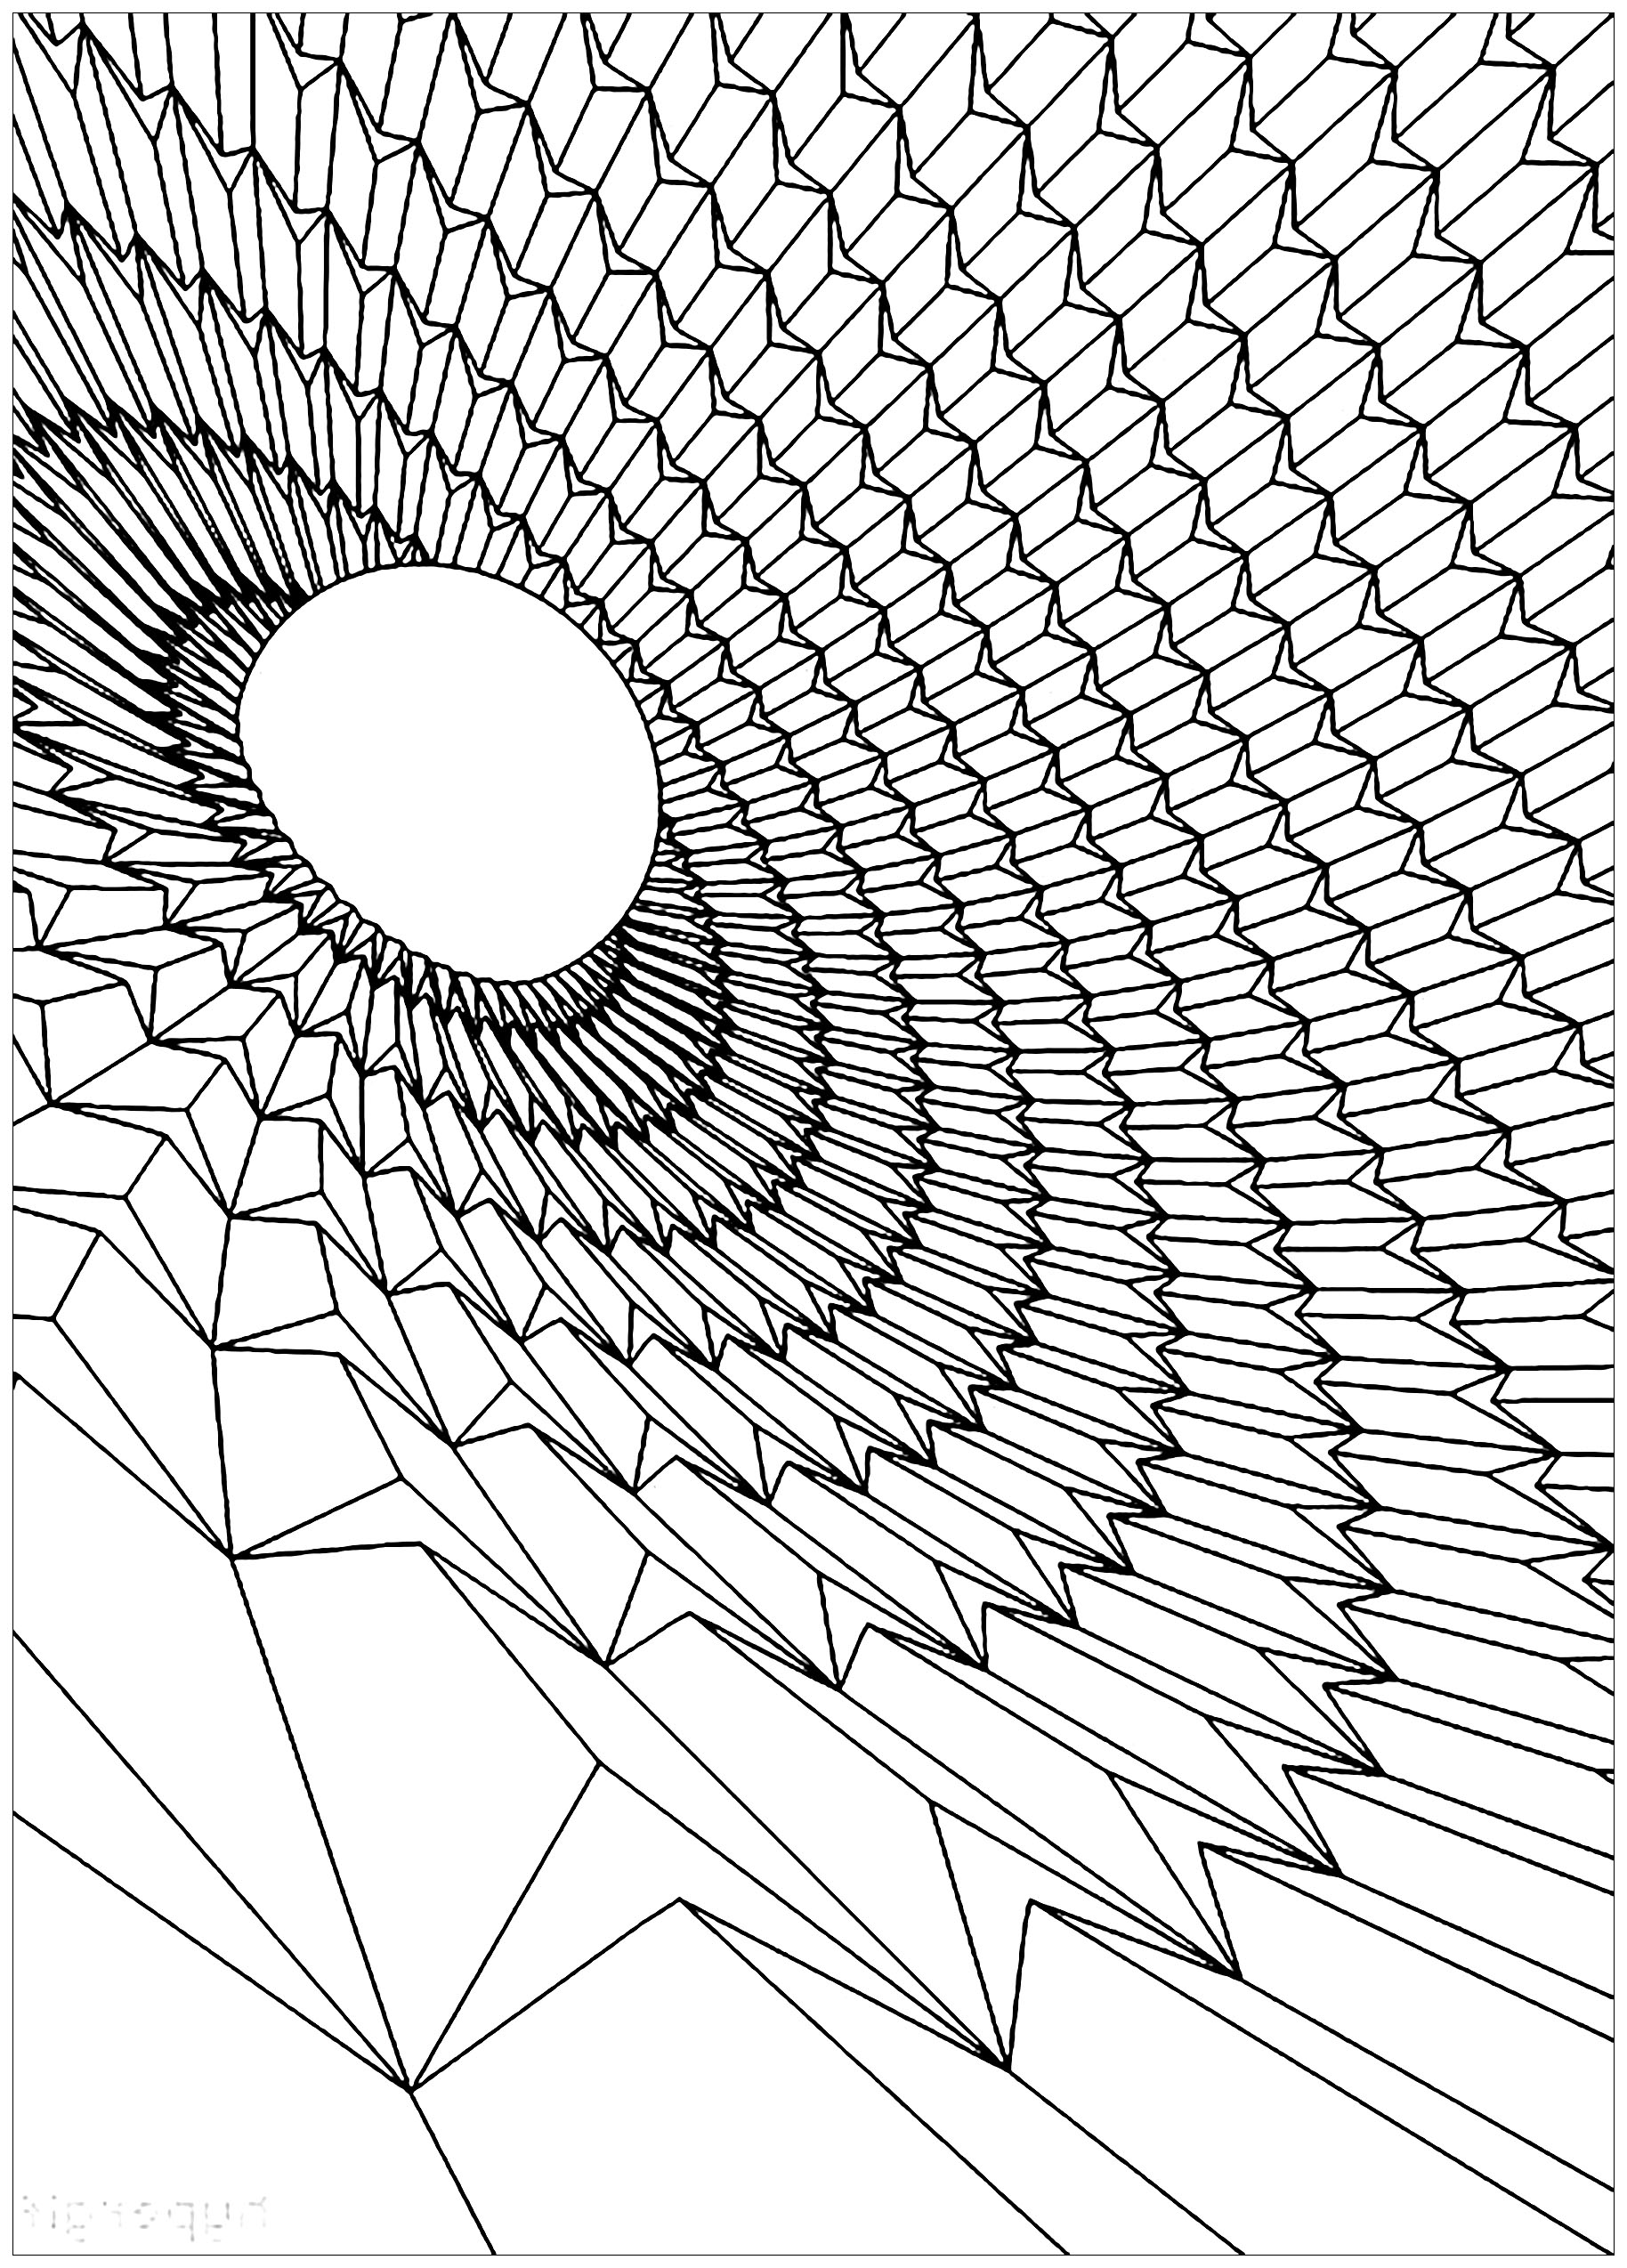 14+ pages printable trippy easy trippy coloring pages for adults